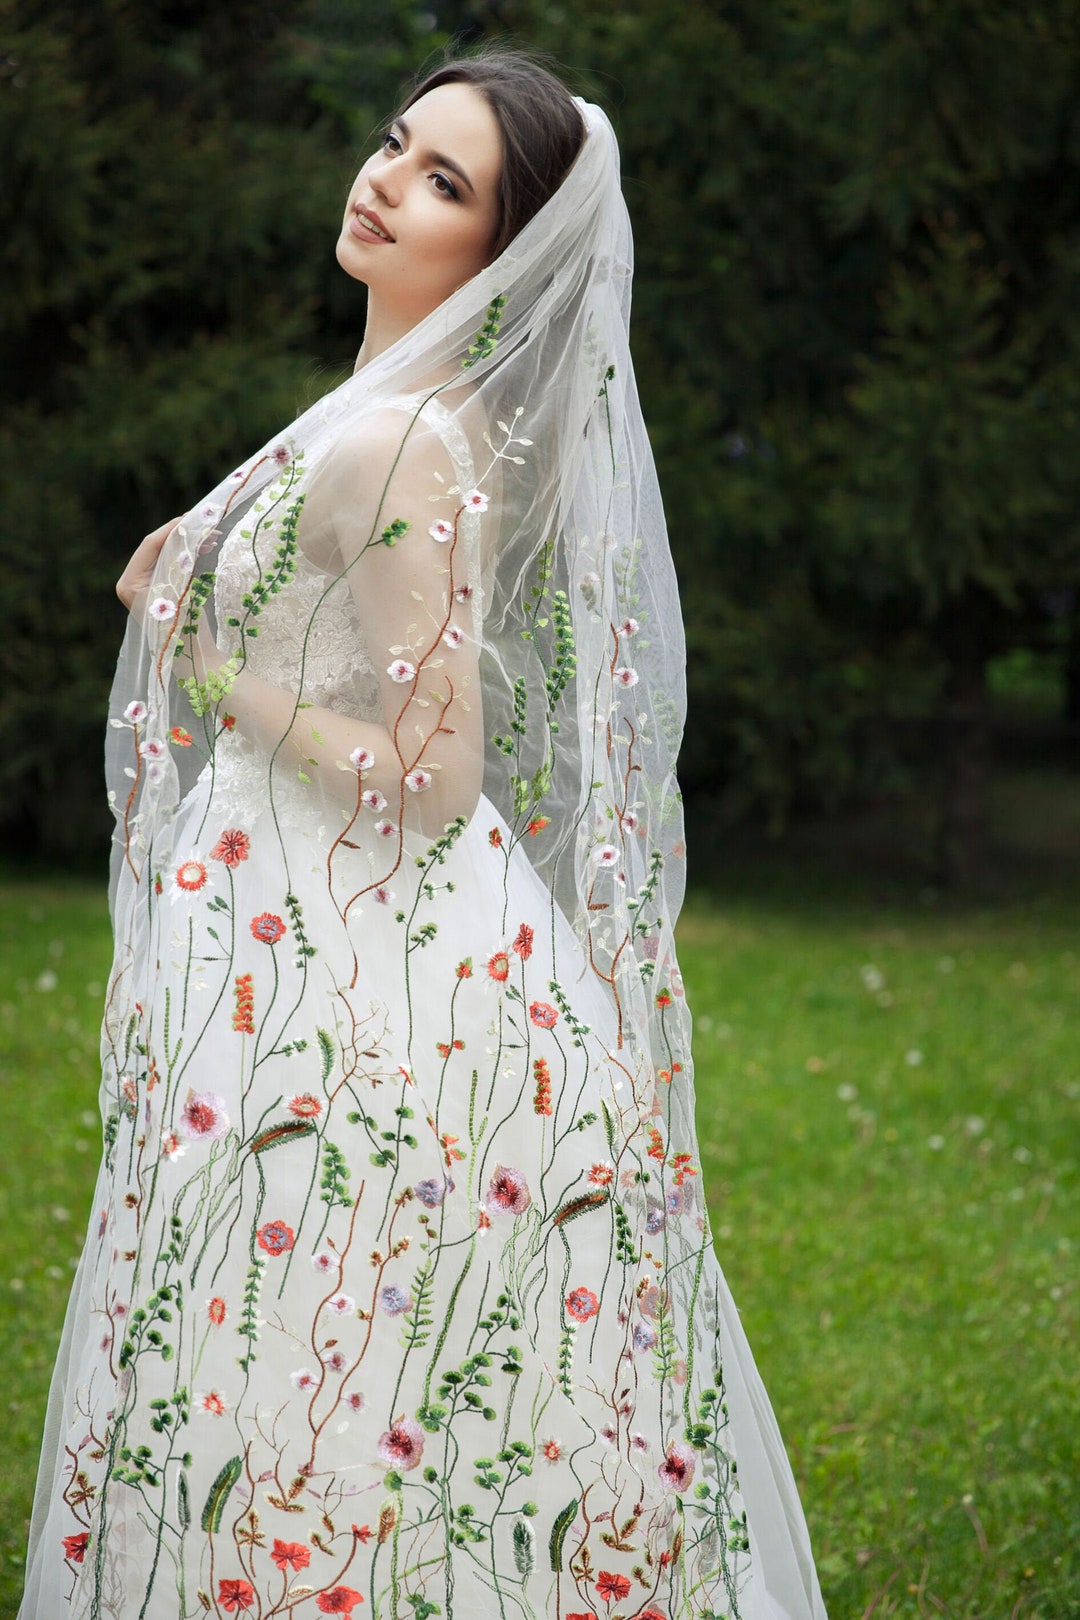 Twigs & Honey Cathedral Train Veil, Bridal Floral Veil - Floral Embroidered Bridal Train Veil, Cathedral - Style #2390